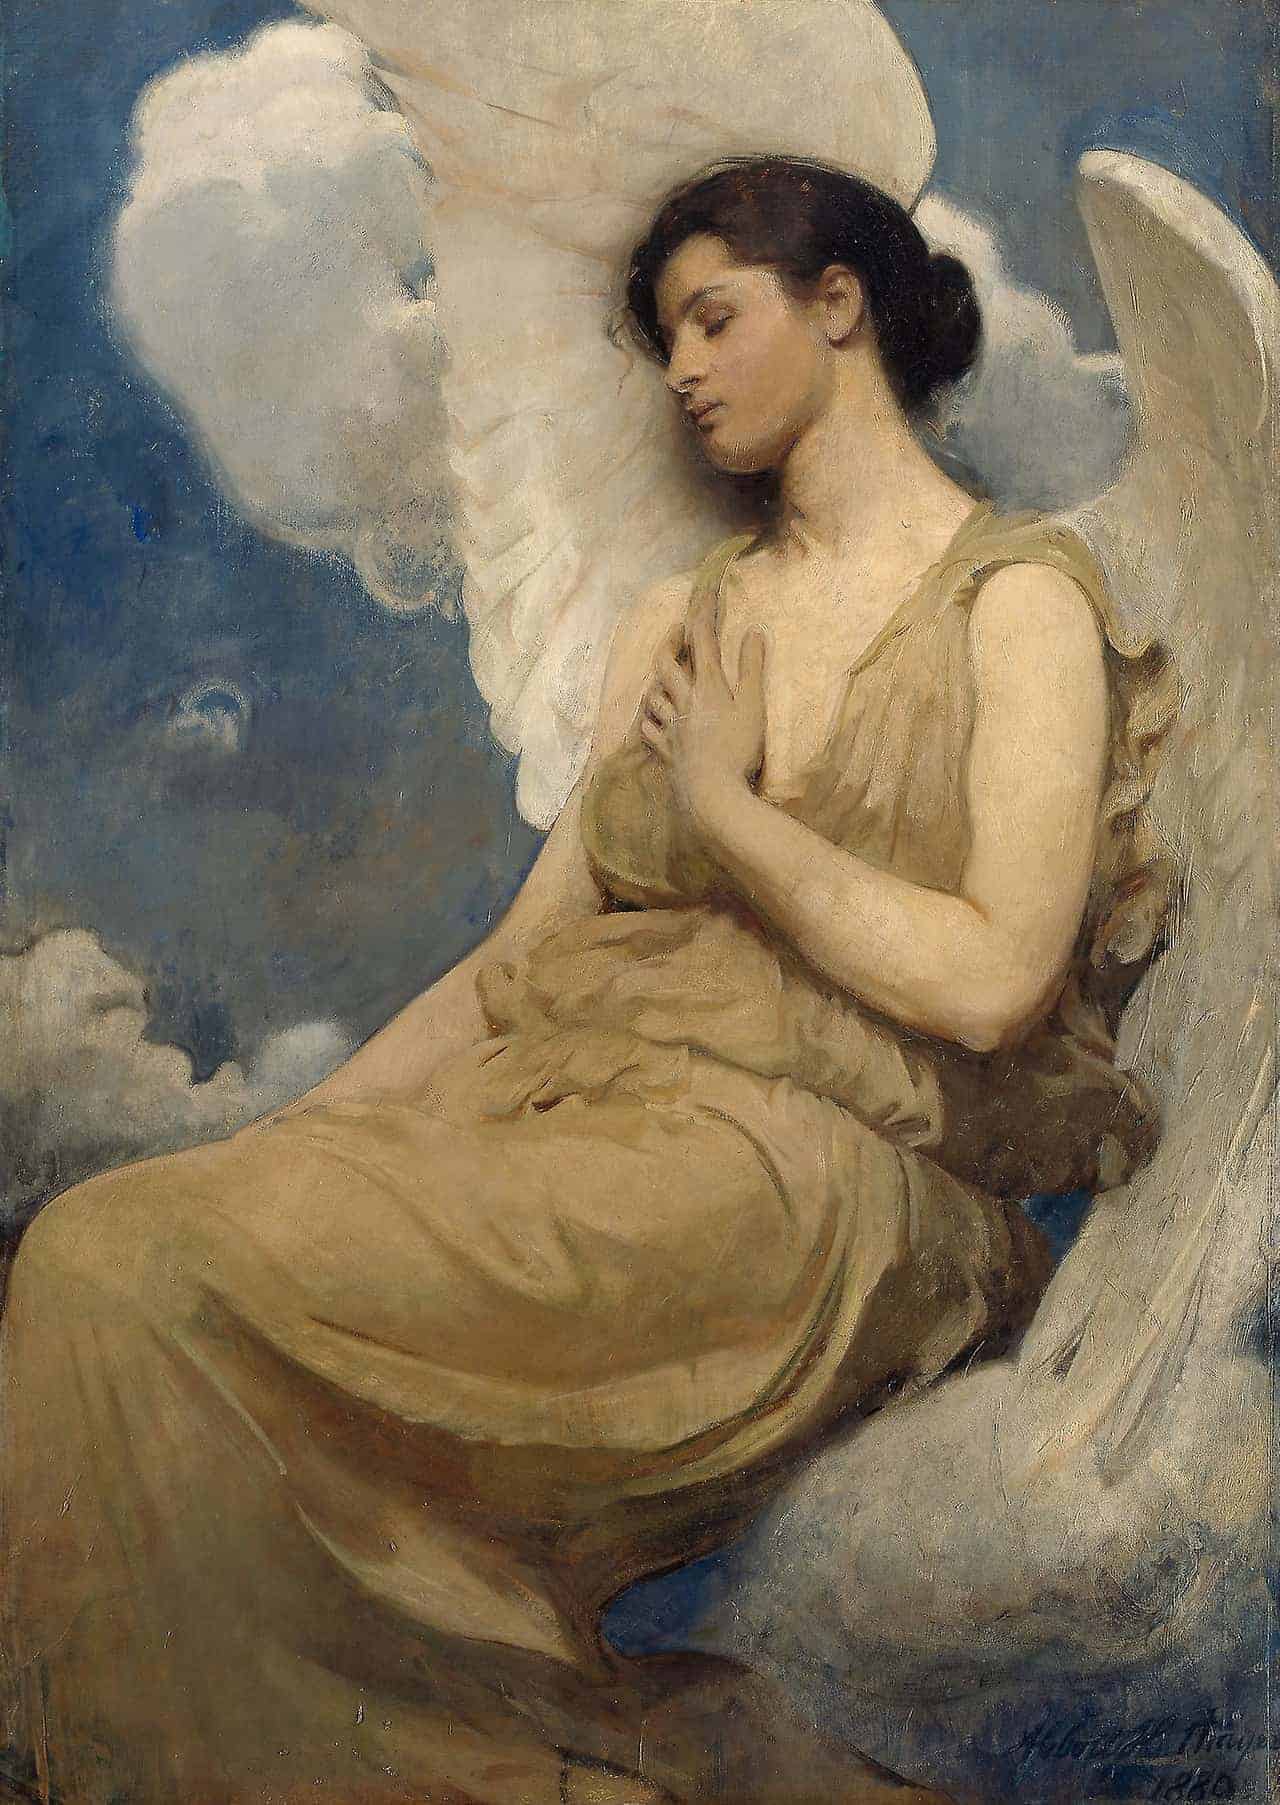 Abbott Handerson ThayeWinged Figure 1889, Art Institute of Chicago (article on forgiveness)